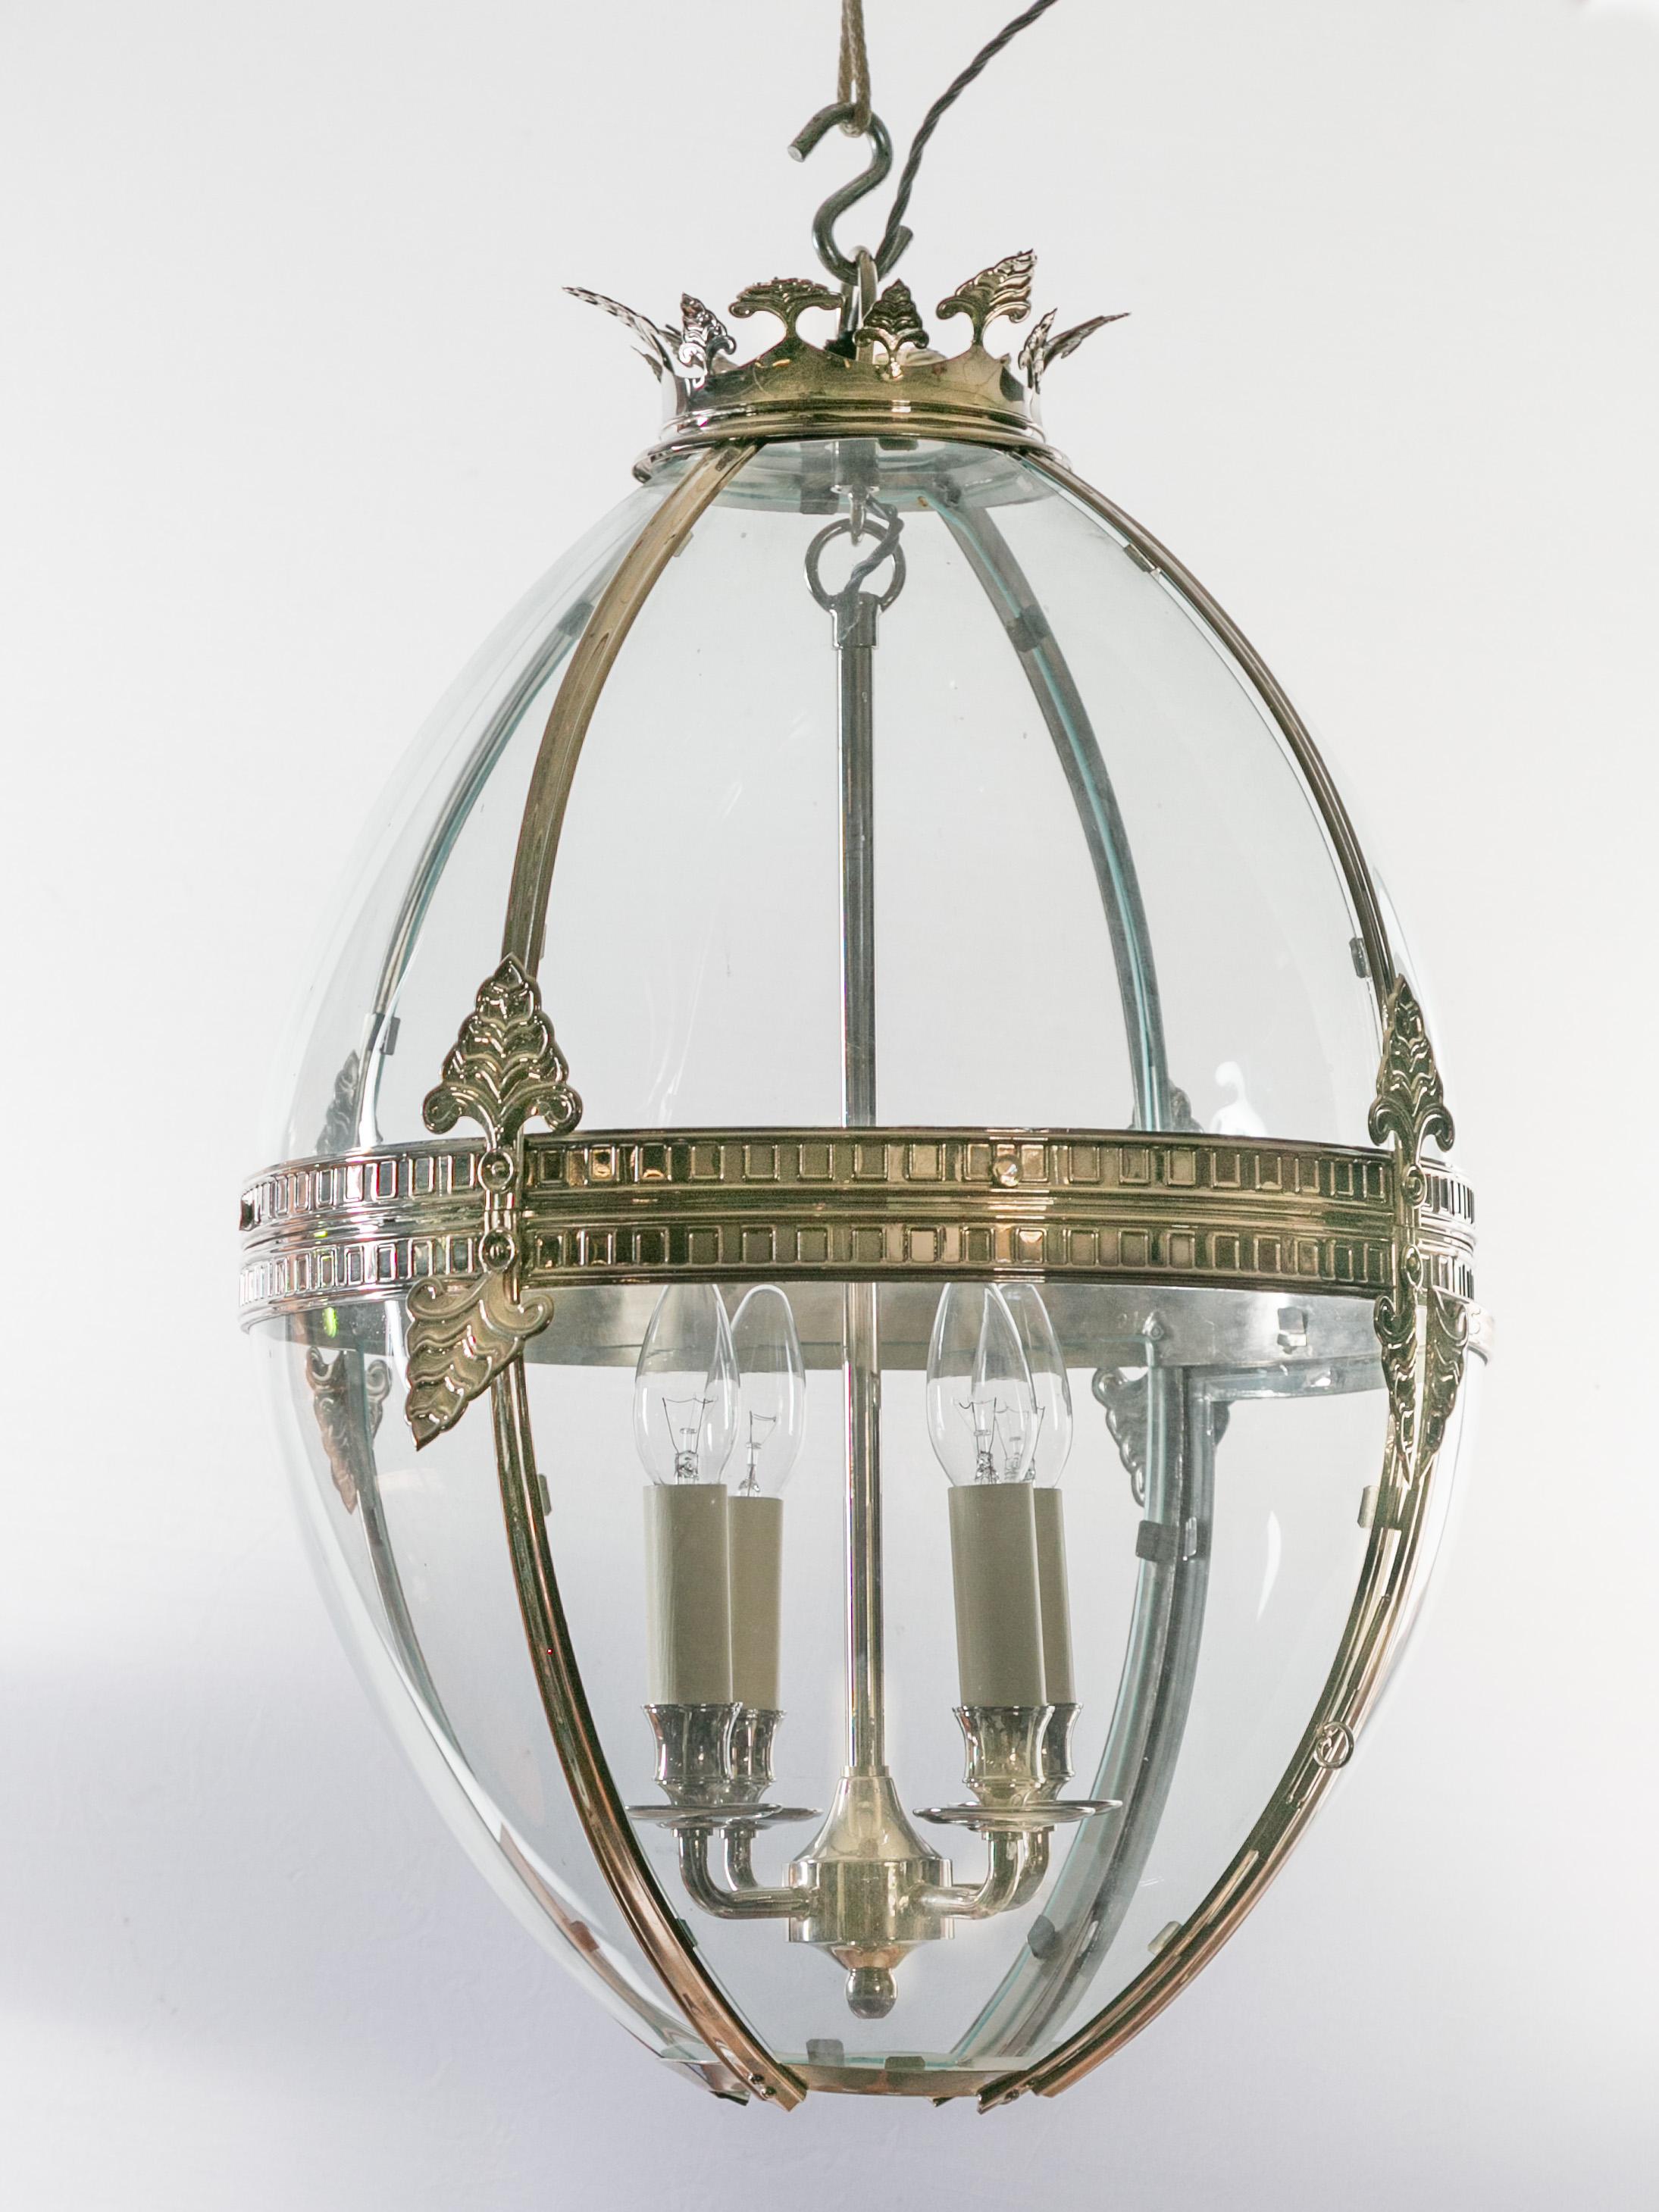 English Midcentury Nickel and Glass Four-Light Ovoid Lantern with Palmettes For Sale 1